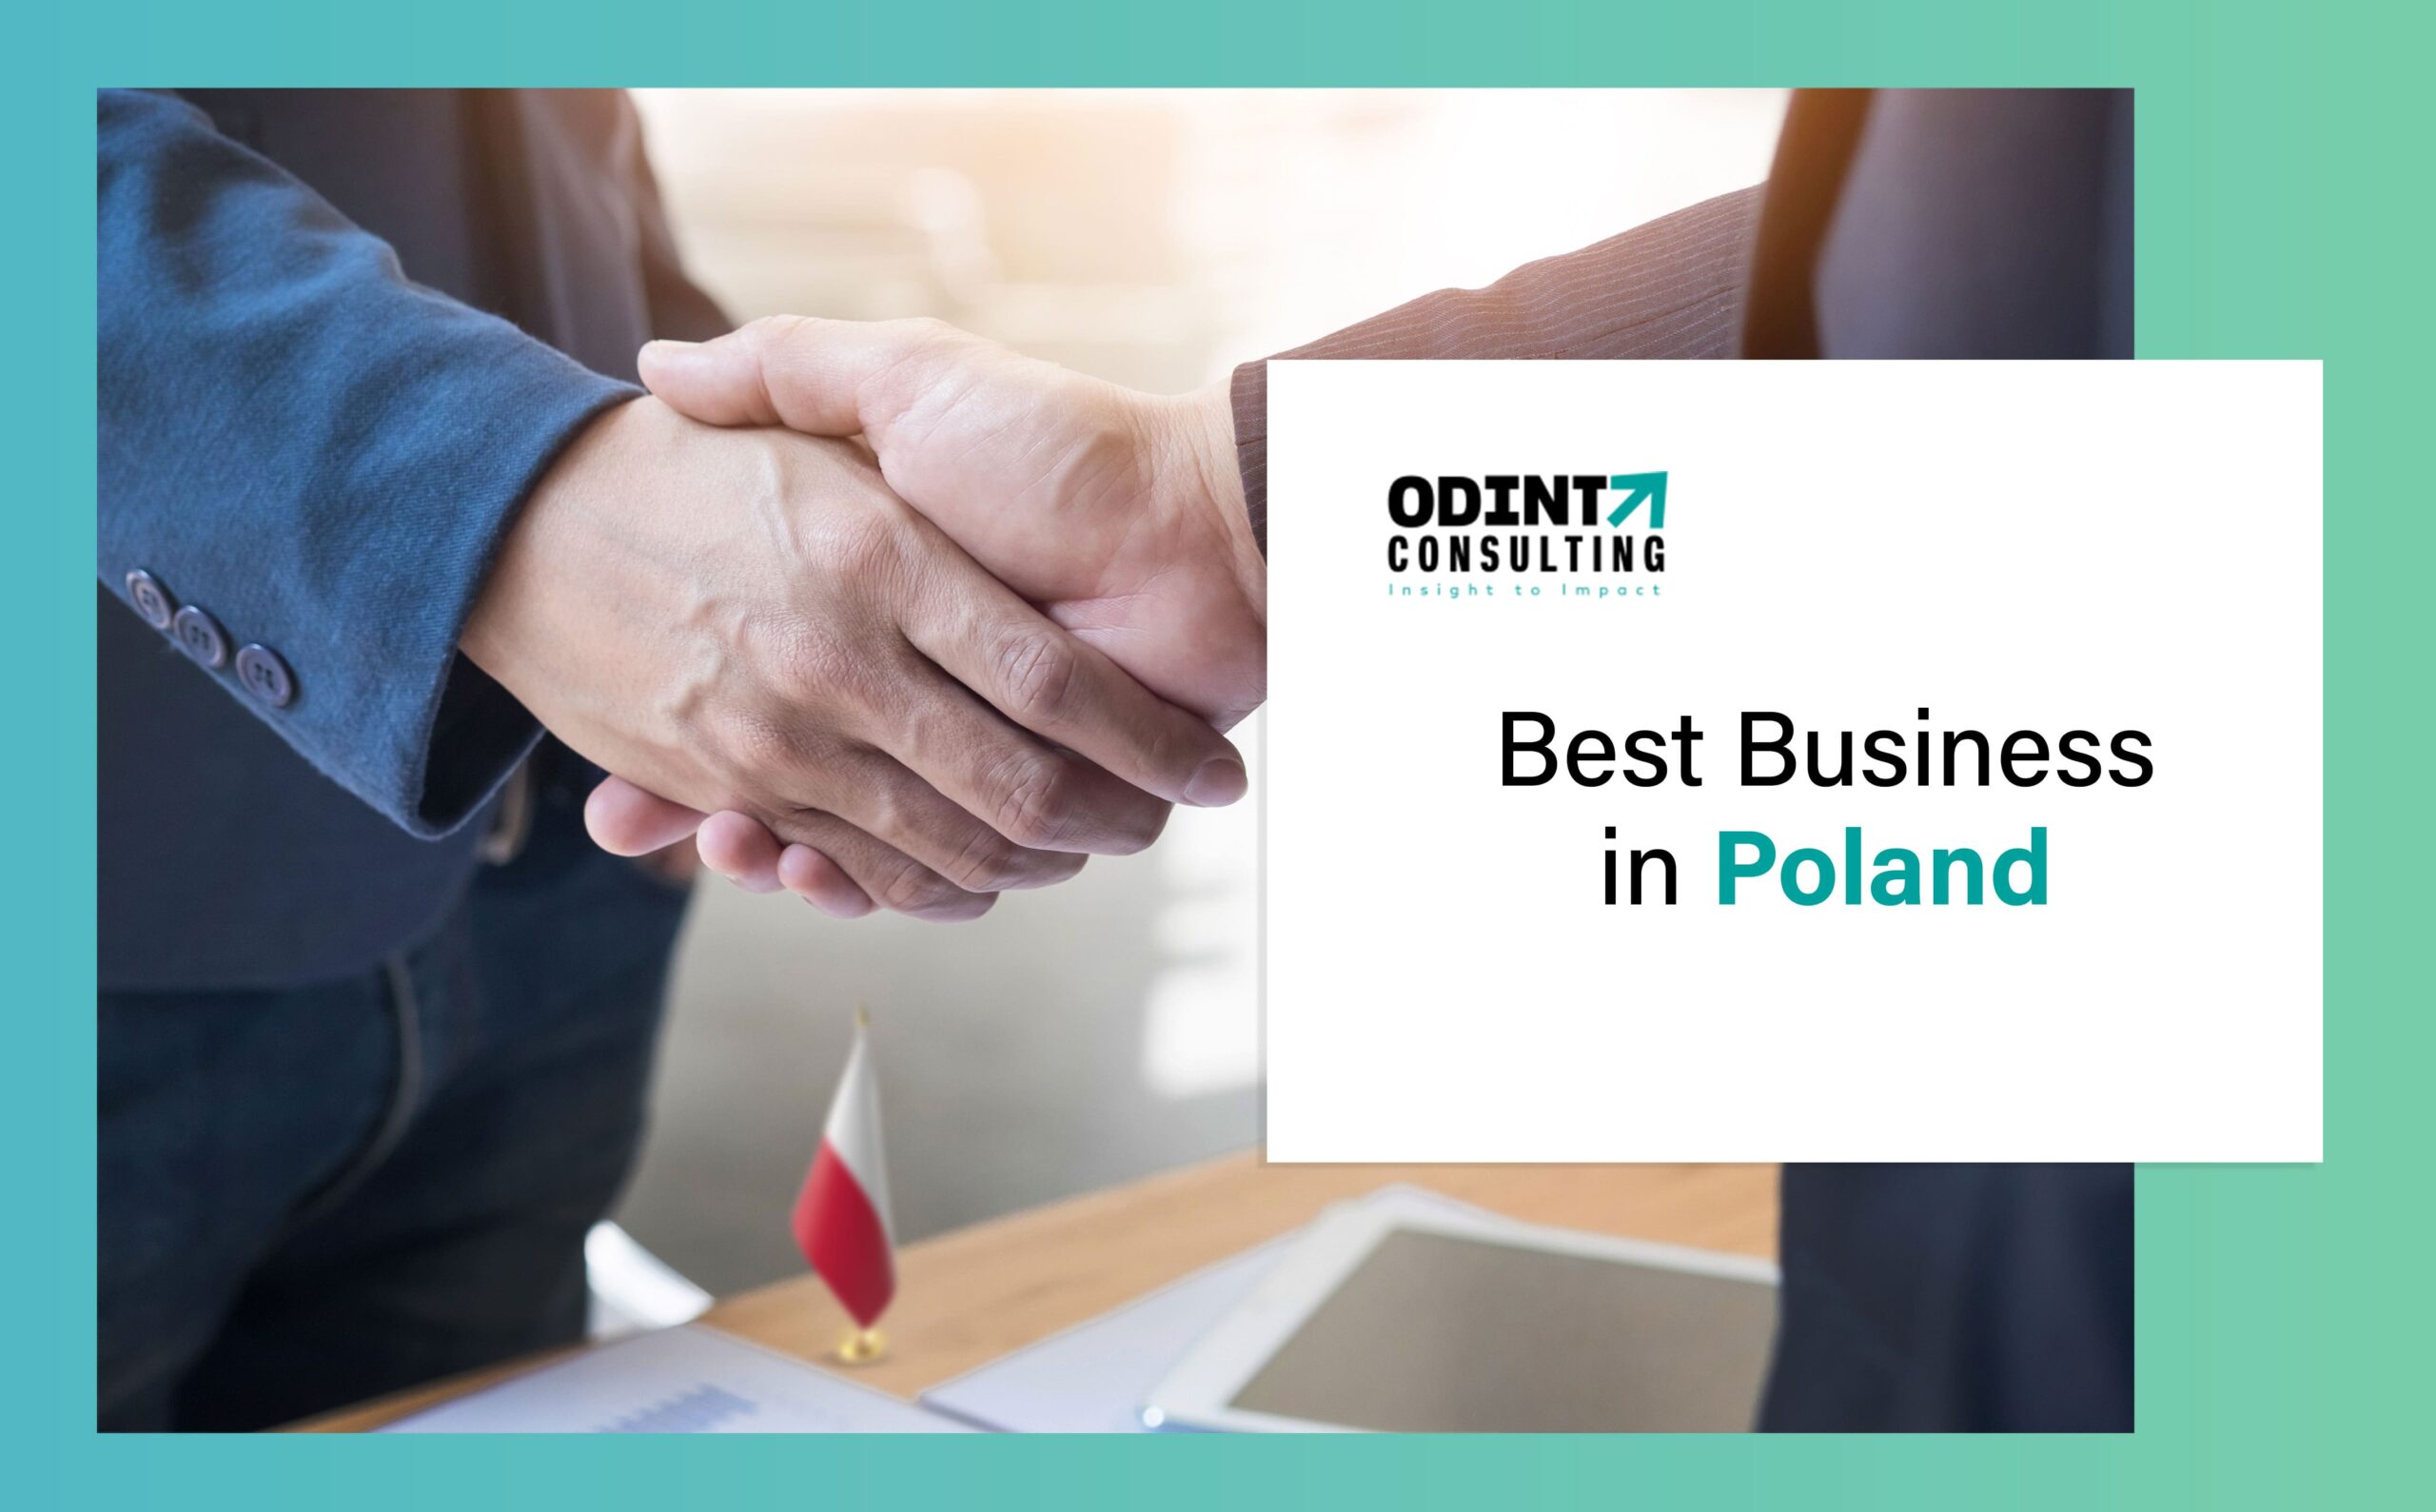 7 Best Business in Poland with Expert Assistance